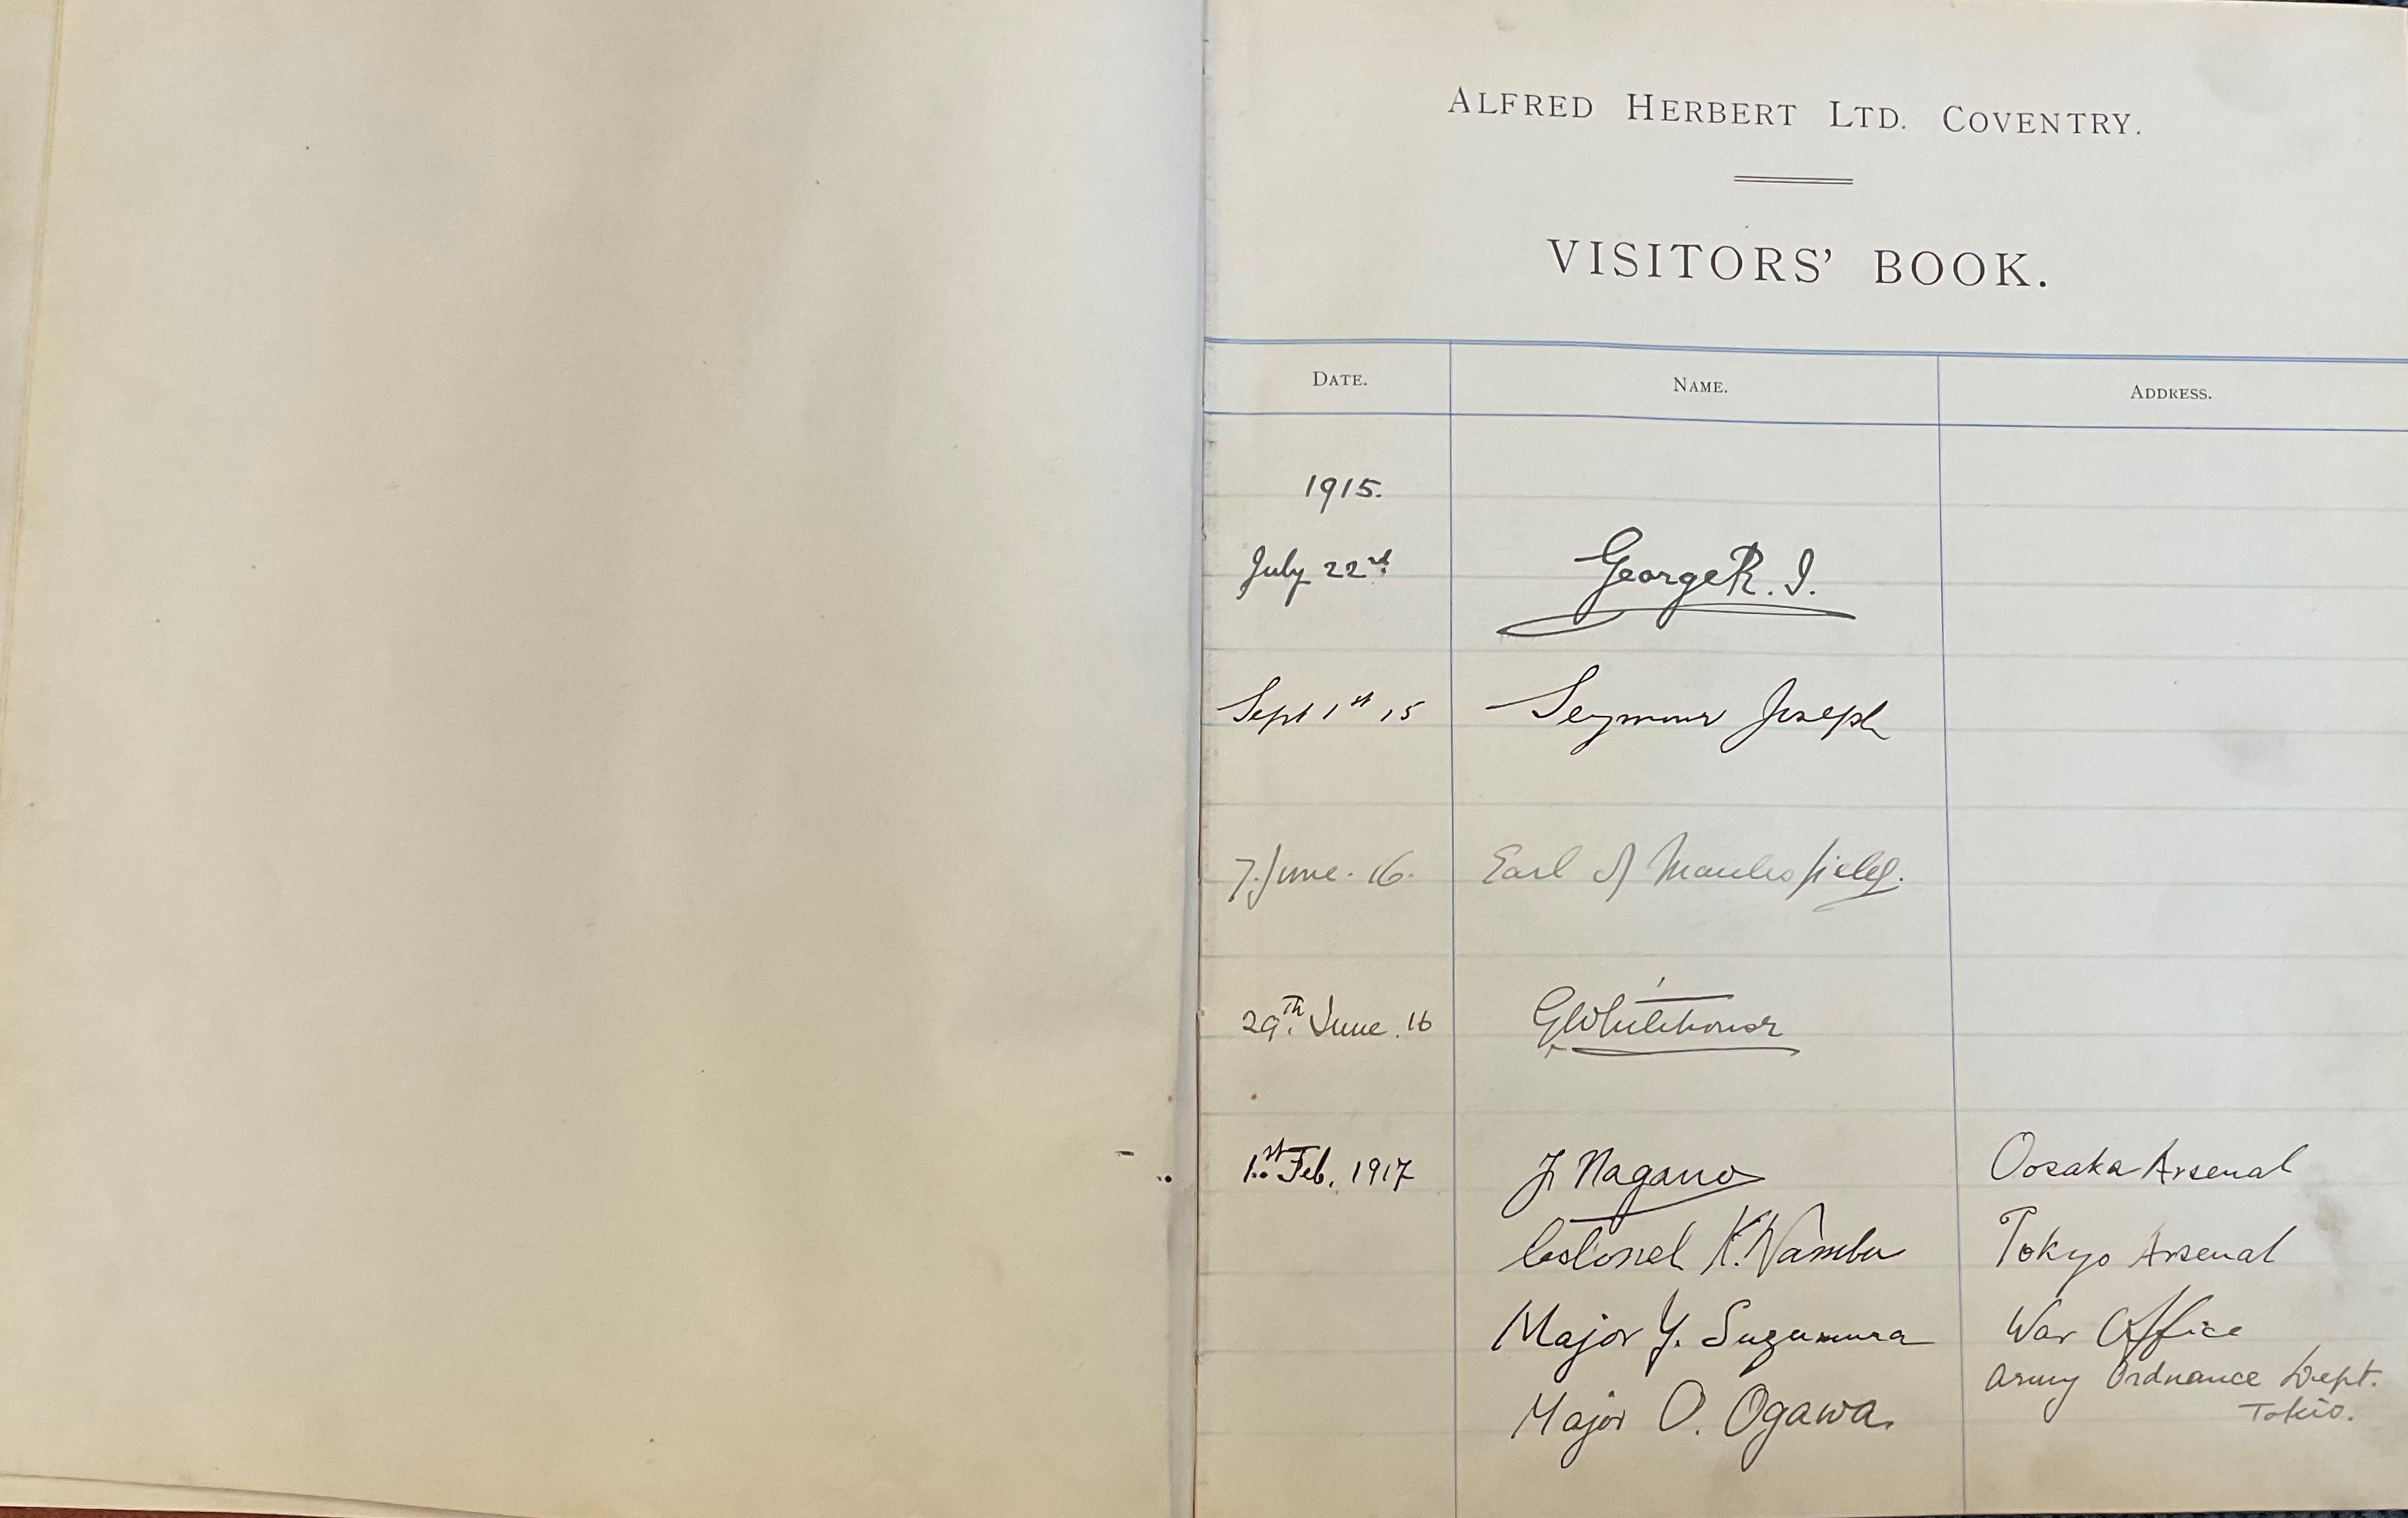 King George V and Japanese Military signed Alfred Herbert Ltd, Coventry Visitors Book. - Image 3 of 5